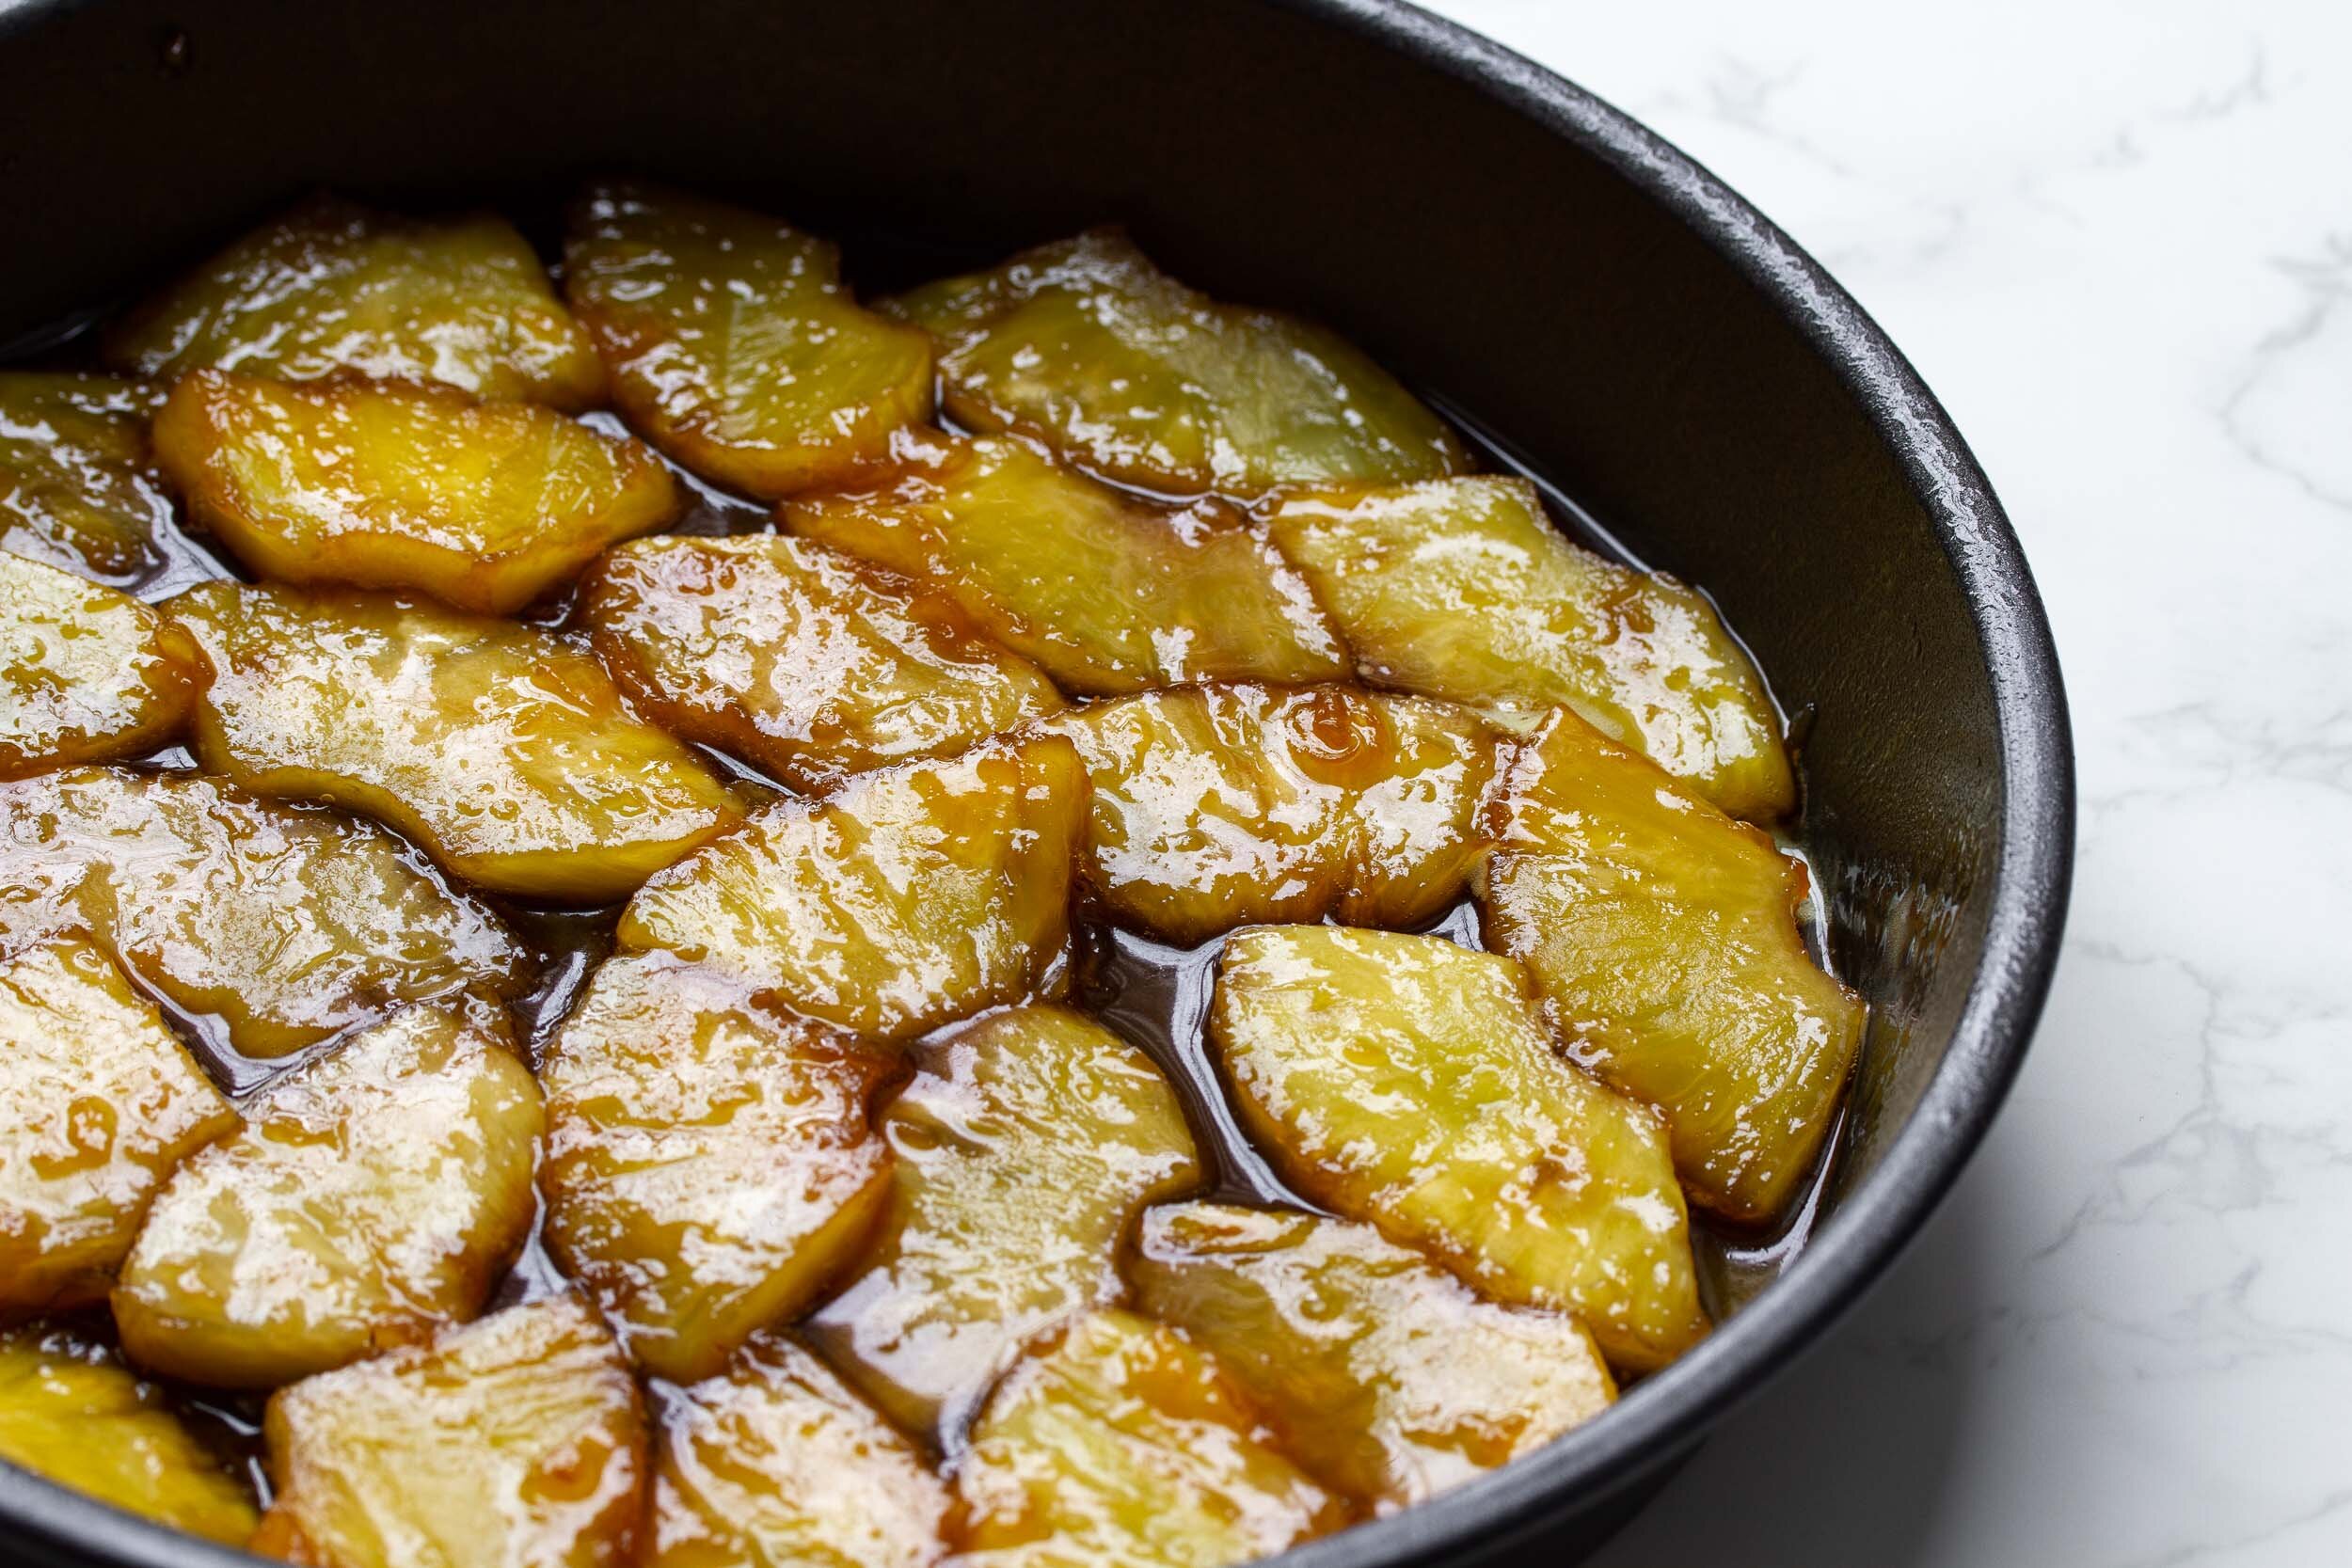  Put the fruit with the syrup into a single layer in the cake pan. 